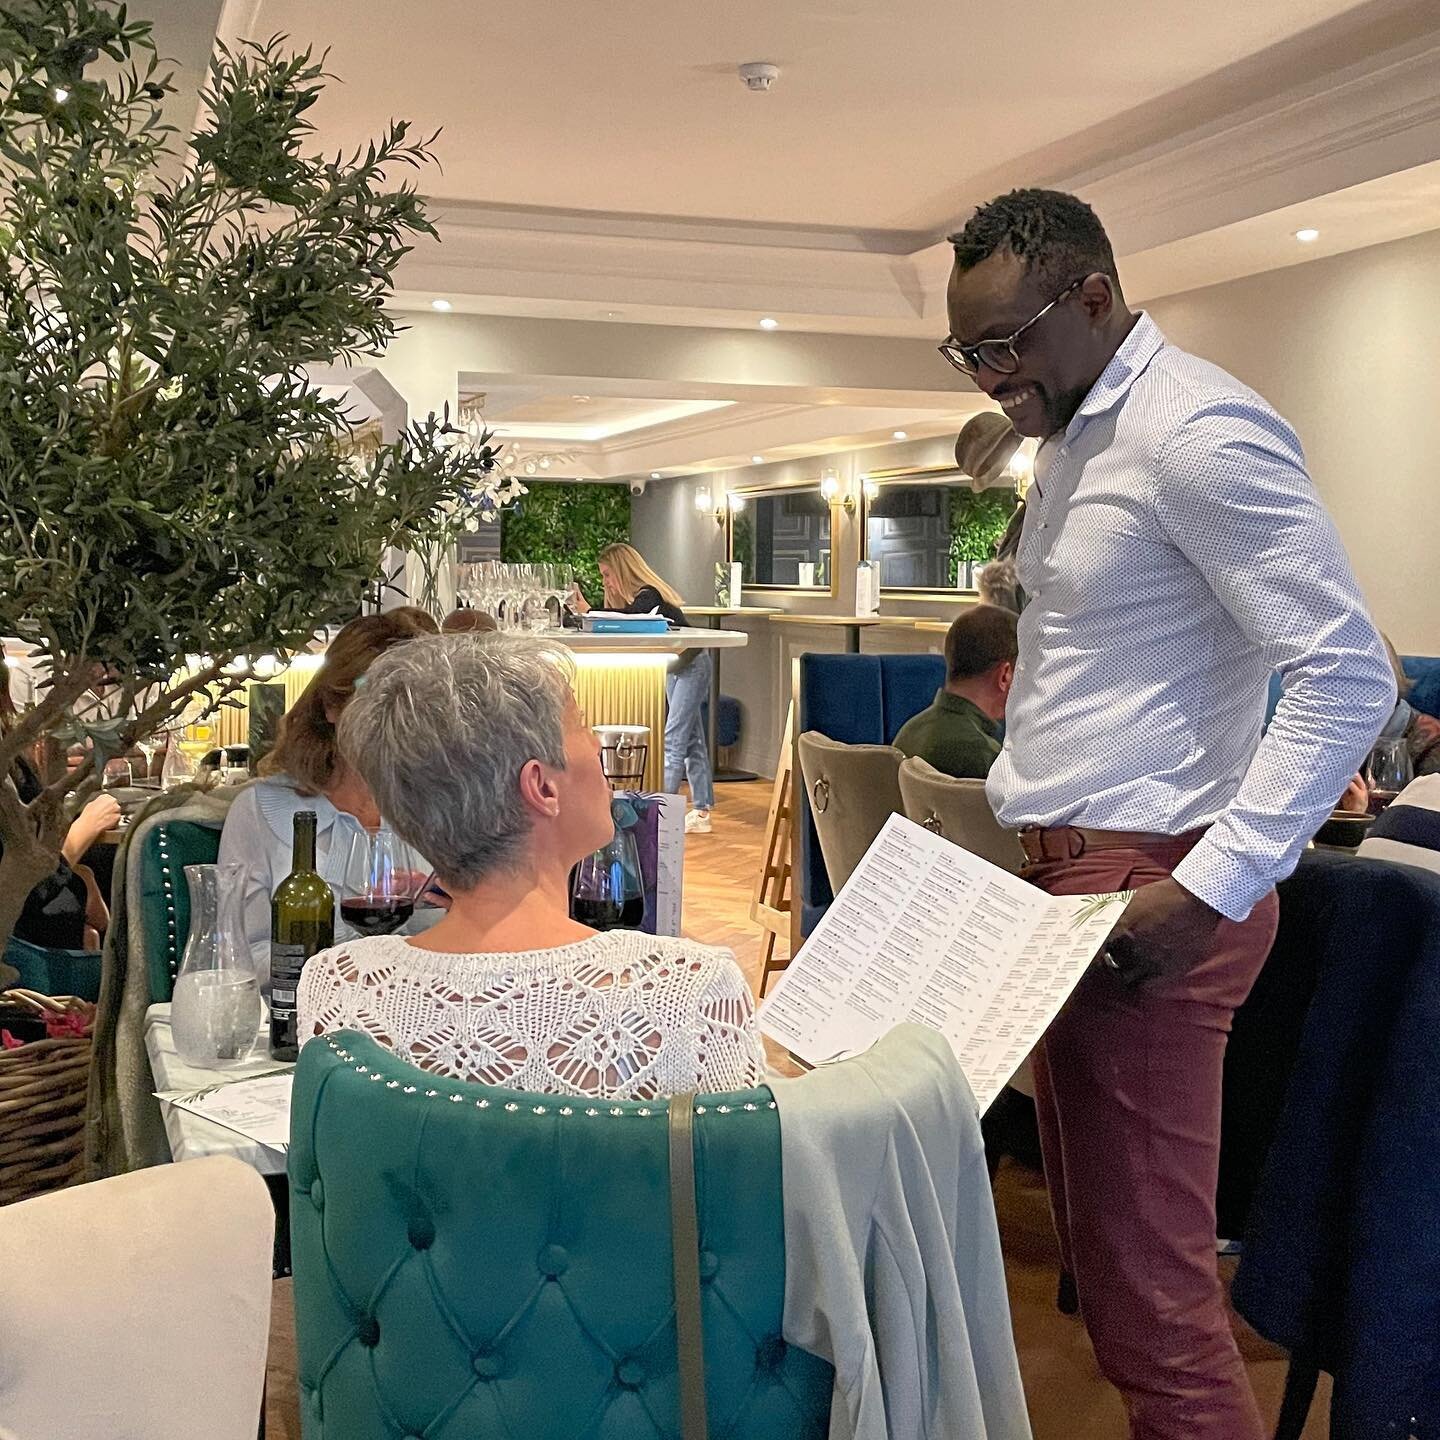 Manager John on hand to help some important decisions 😉 Happy midweek friends x
.
.
.
.

#zeitounclaygate #lebanese #lebanon #lebanesefood #lebanesecuisine #bar #restaurant #food #drinks #team #staff  #support #supportlocal #thegreen #claygate #eshe